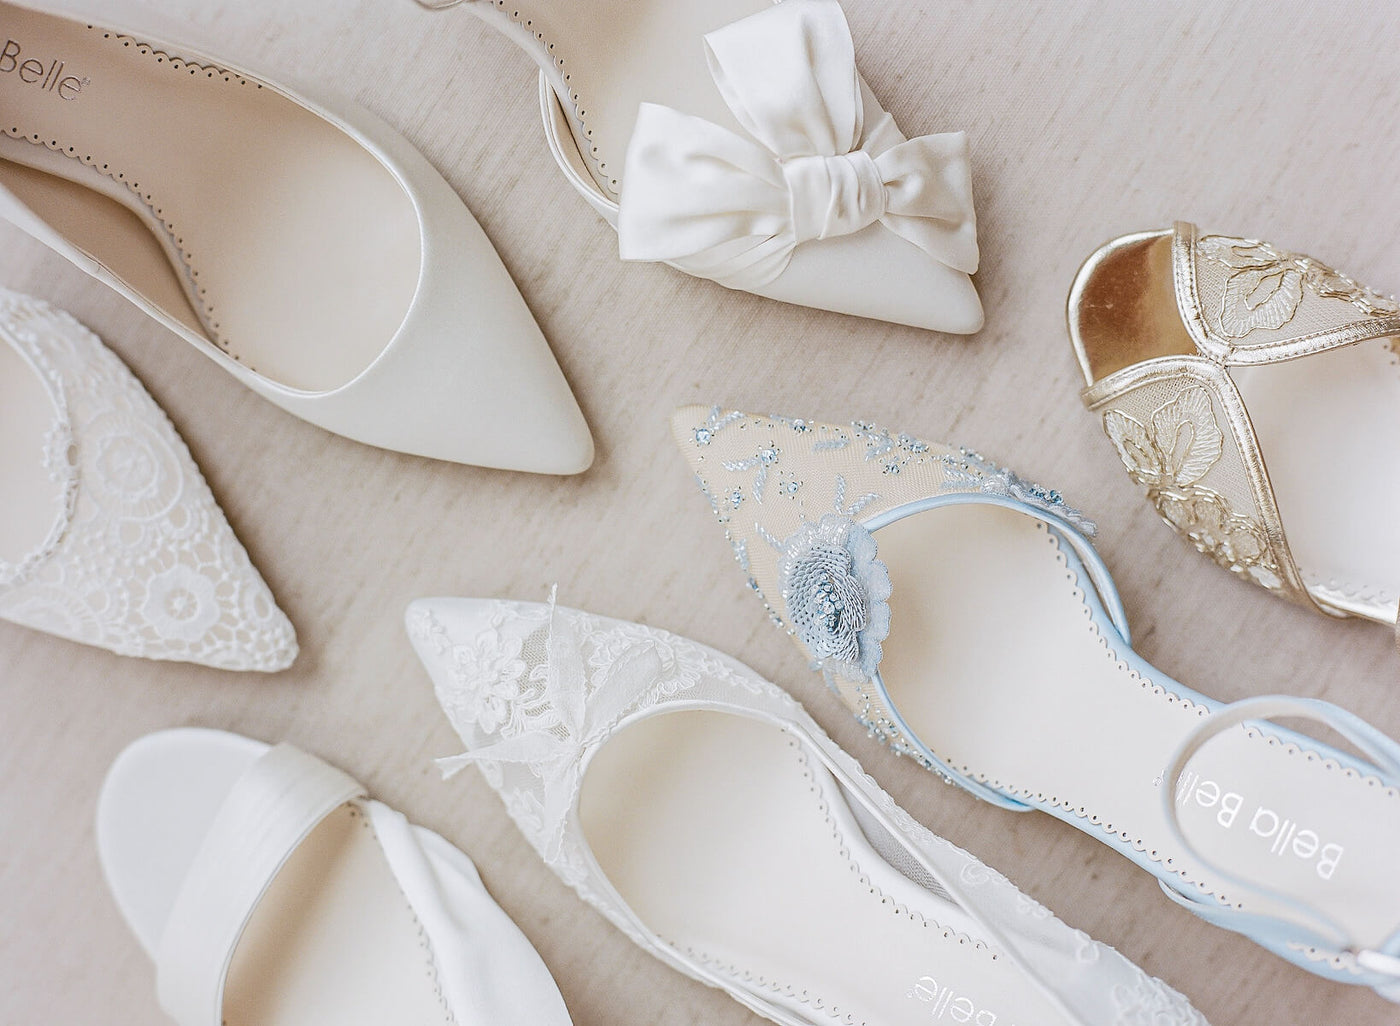 Your Wedding Shoe Based On Your Myers-Briggs Personality. 